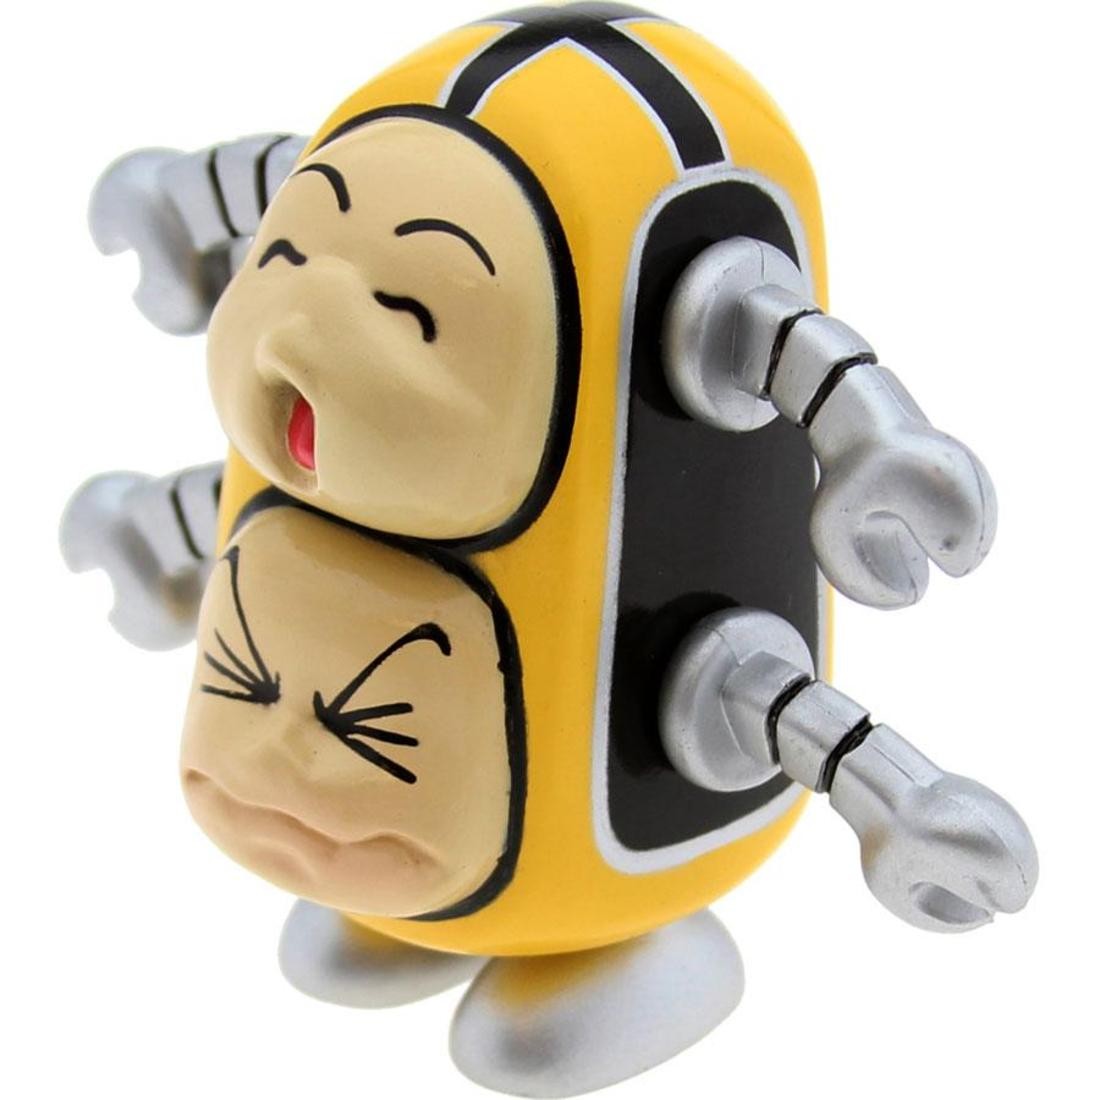 The Galaxy Bunch Doubleheader 3 Inch Figure - Virus Project (yellow)